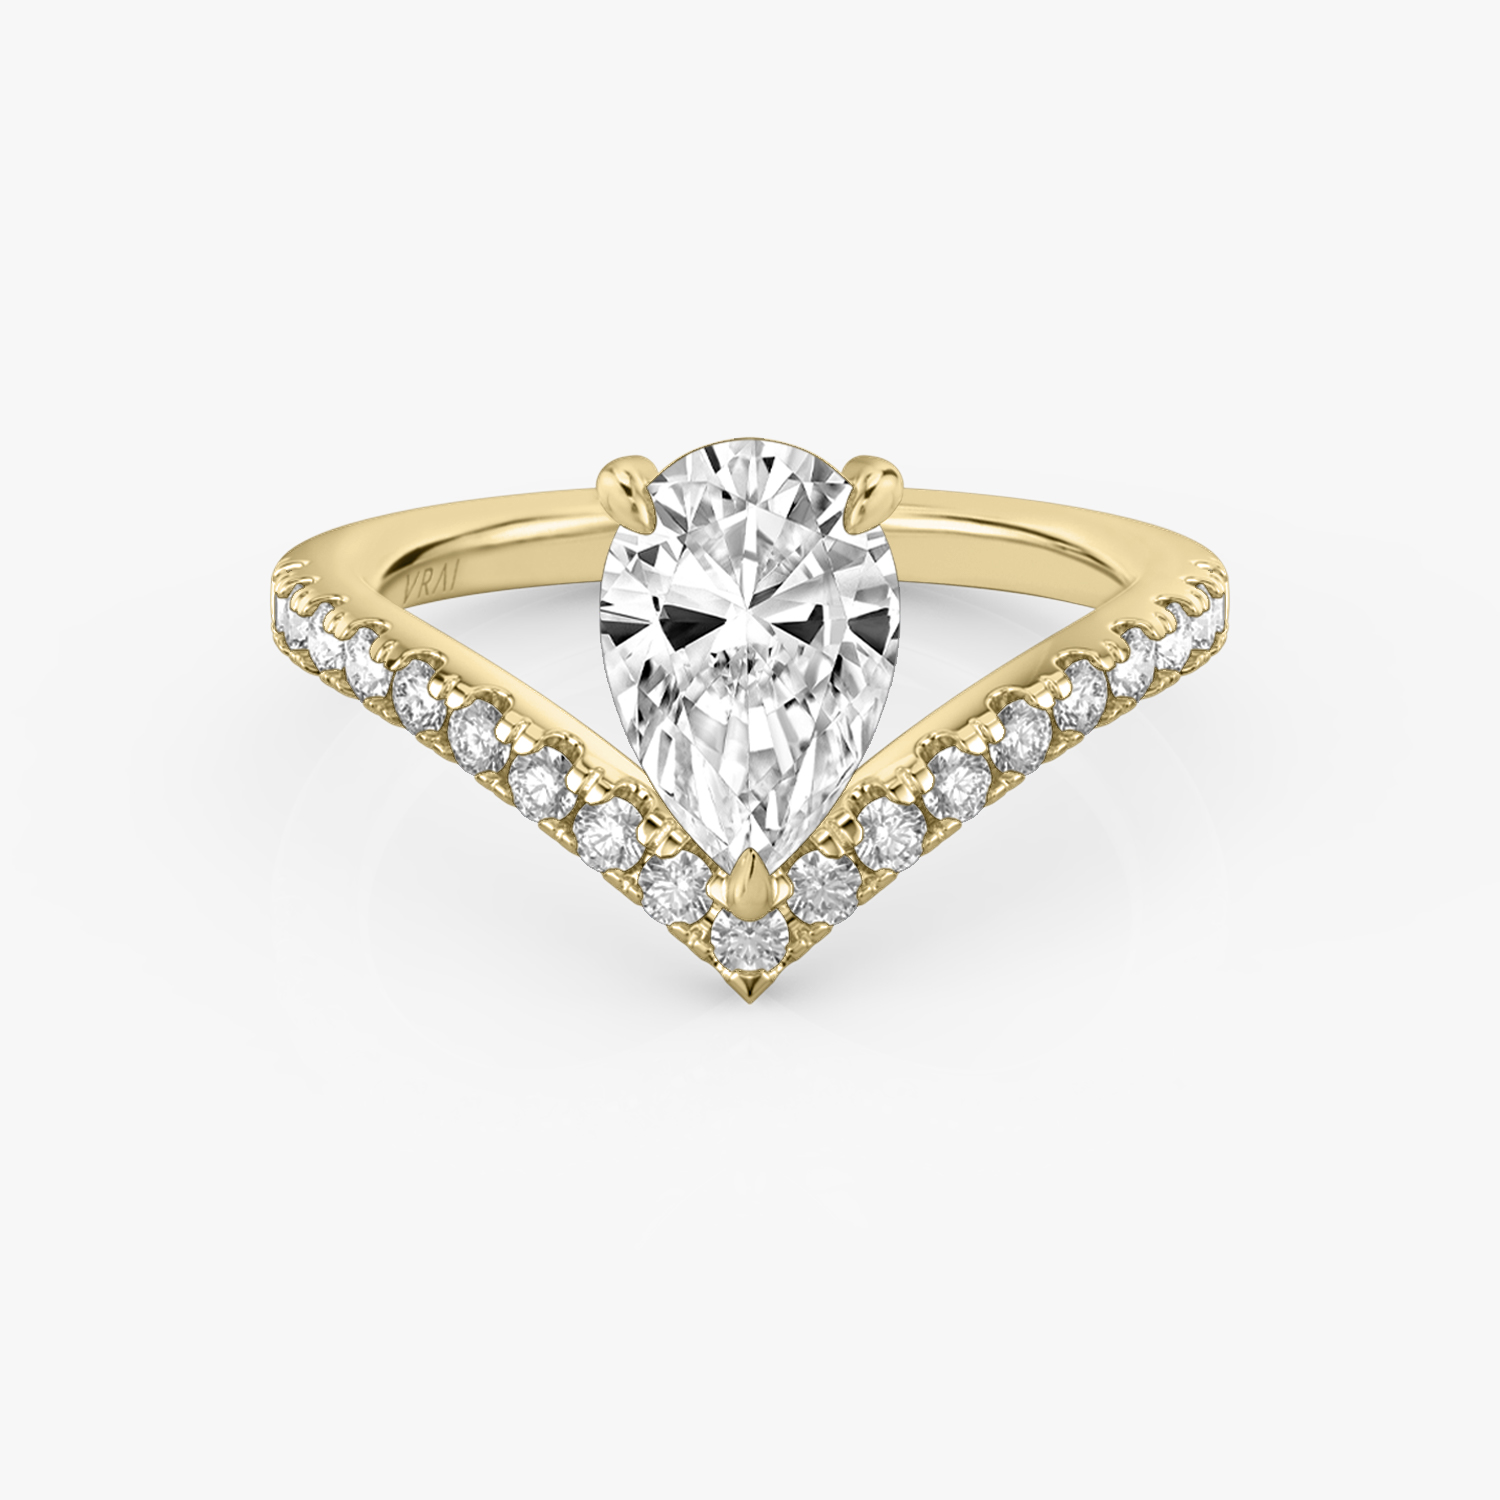 GIA Certified Round and Pear Cut Diamond Ring at Susannah Lovis Jewellers